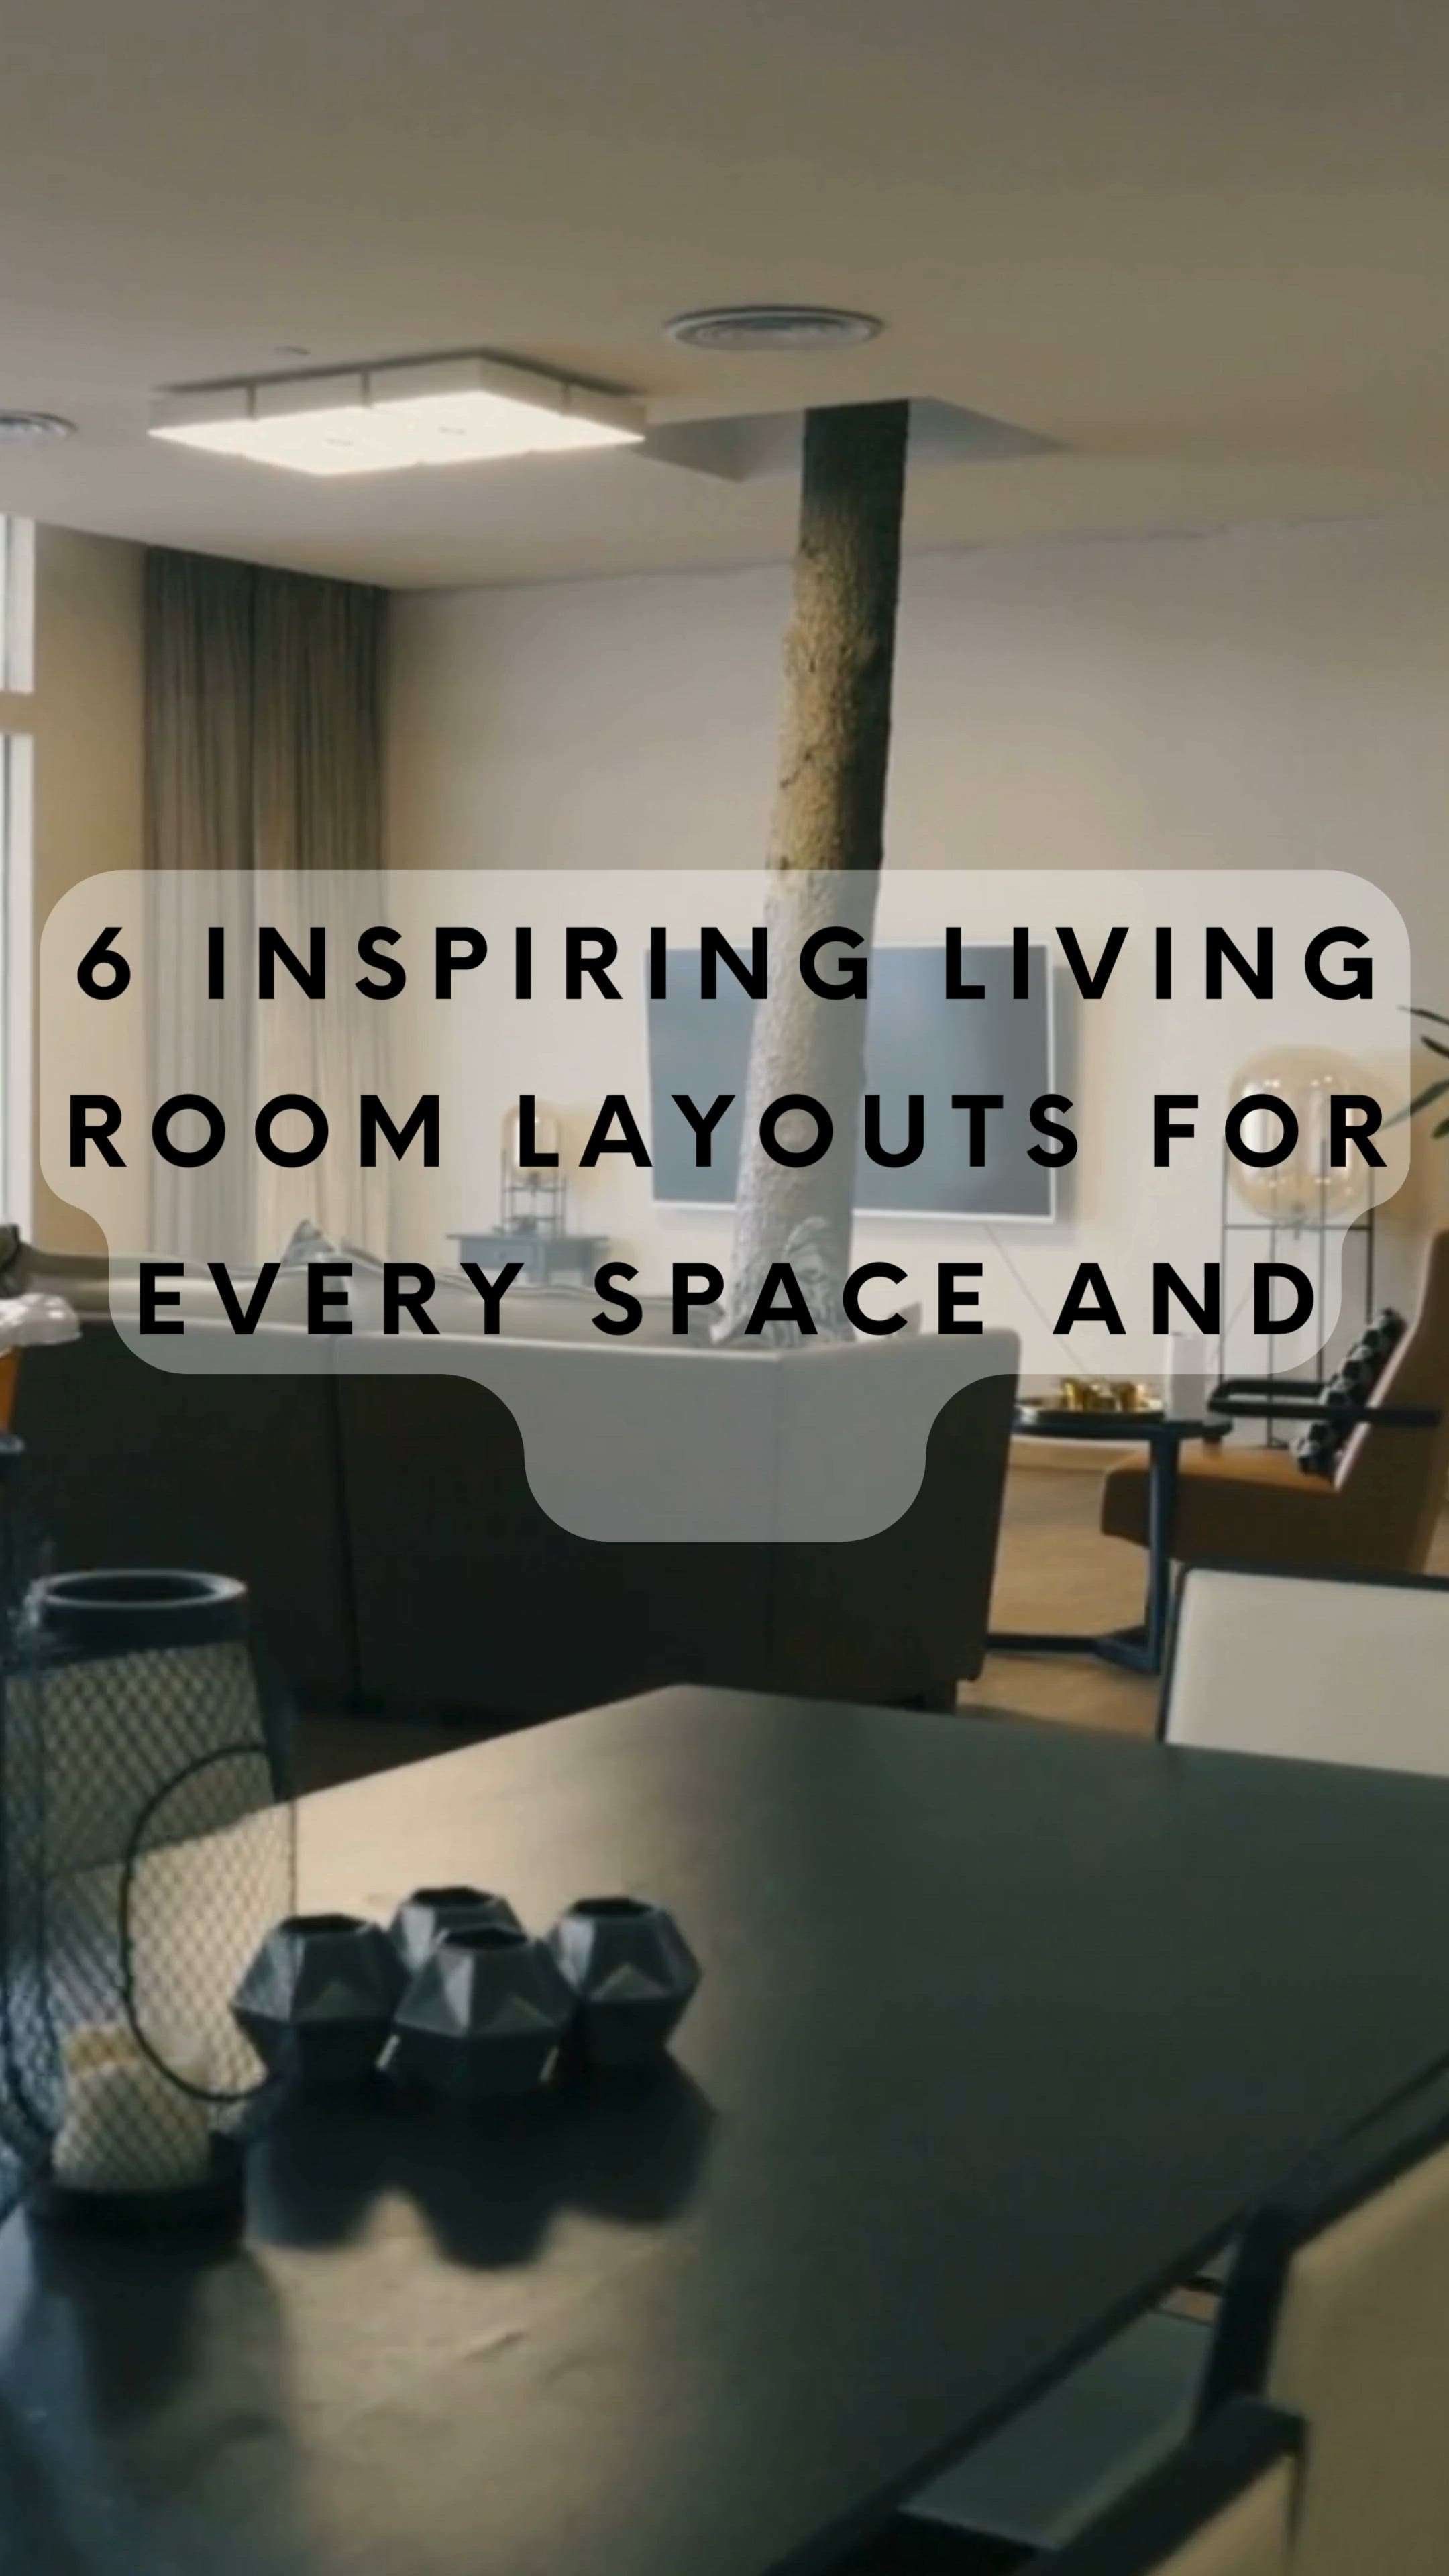 Revamp your living space with these inspiring layouts that perfectly blend style and functionality! 🛋️✨ #HomeDecor #InteriorDesignInspo